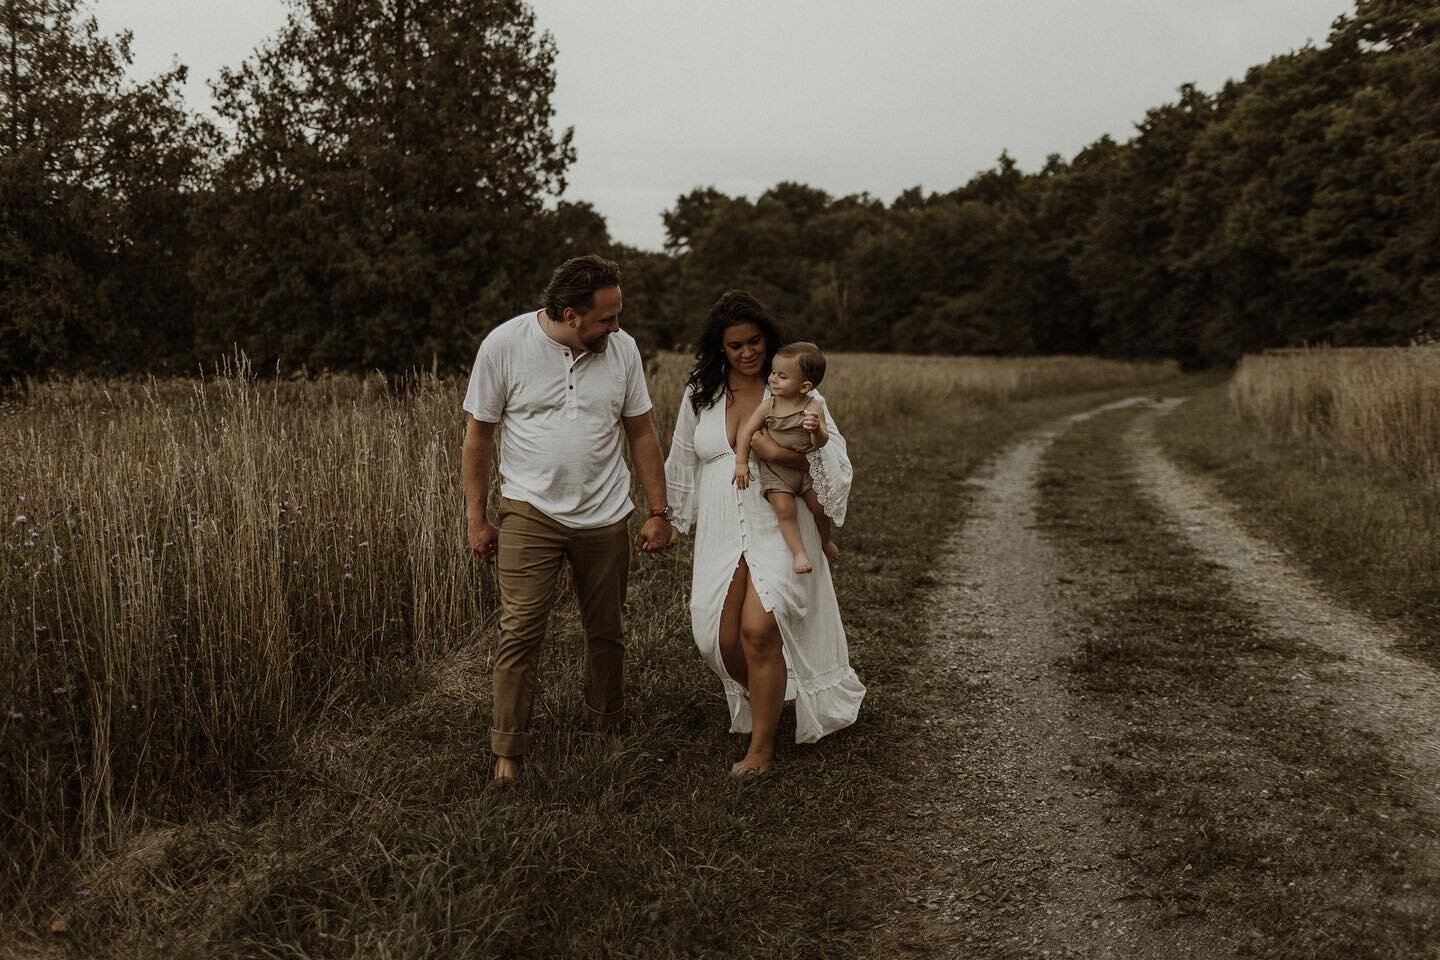 Just delivered this gallery this morning and I had to share some of my favorites. 
I had the honor of photographing mom and dad when this little bear was in mommas tummy, and was so happy to capture their love together a year later 🤎